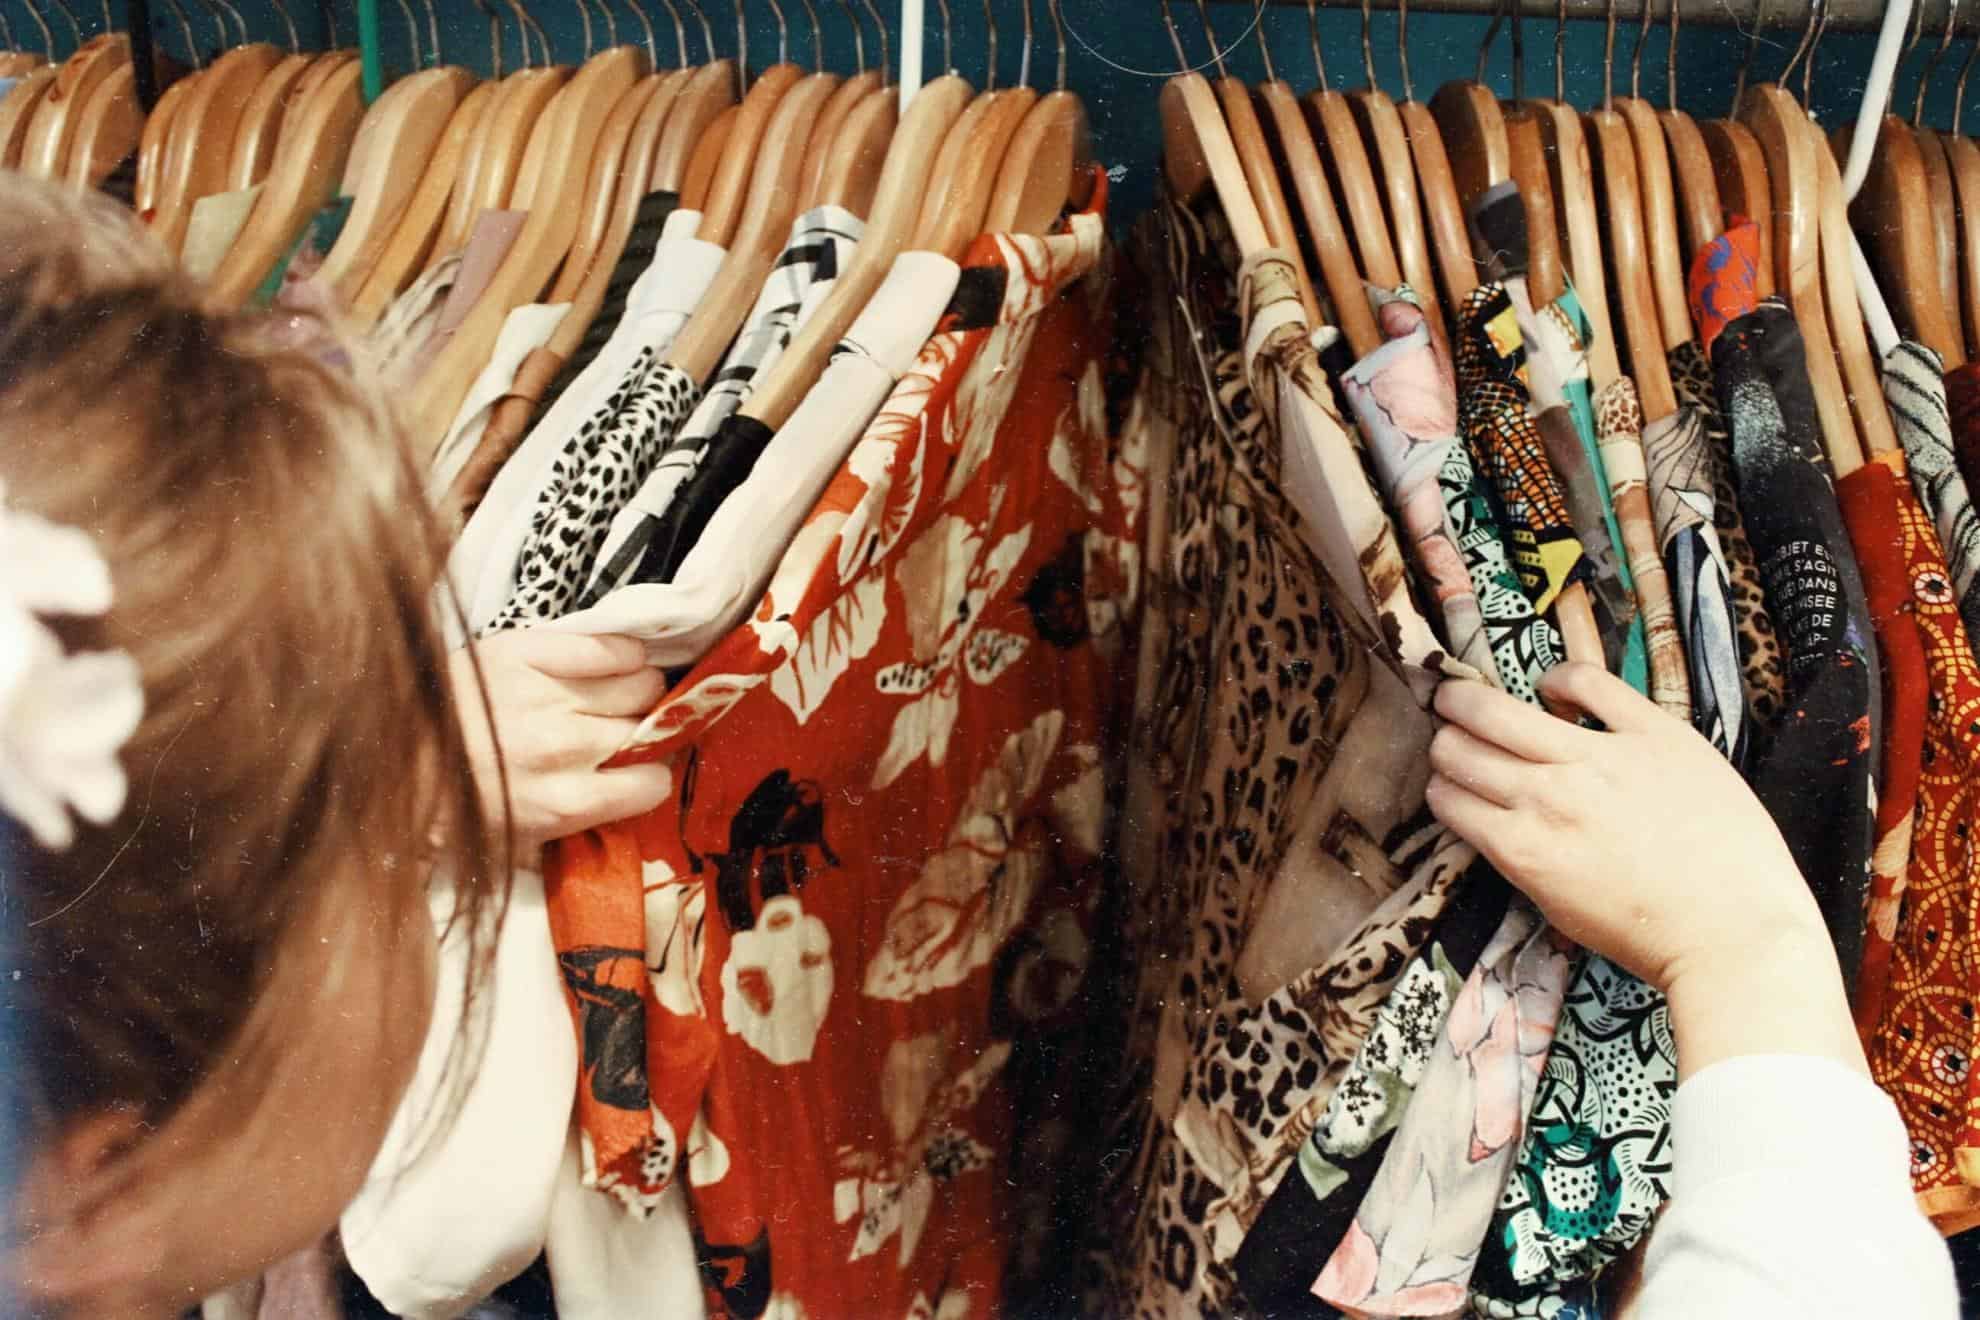 How to Shop for Vintage Clothing